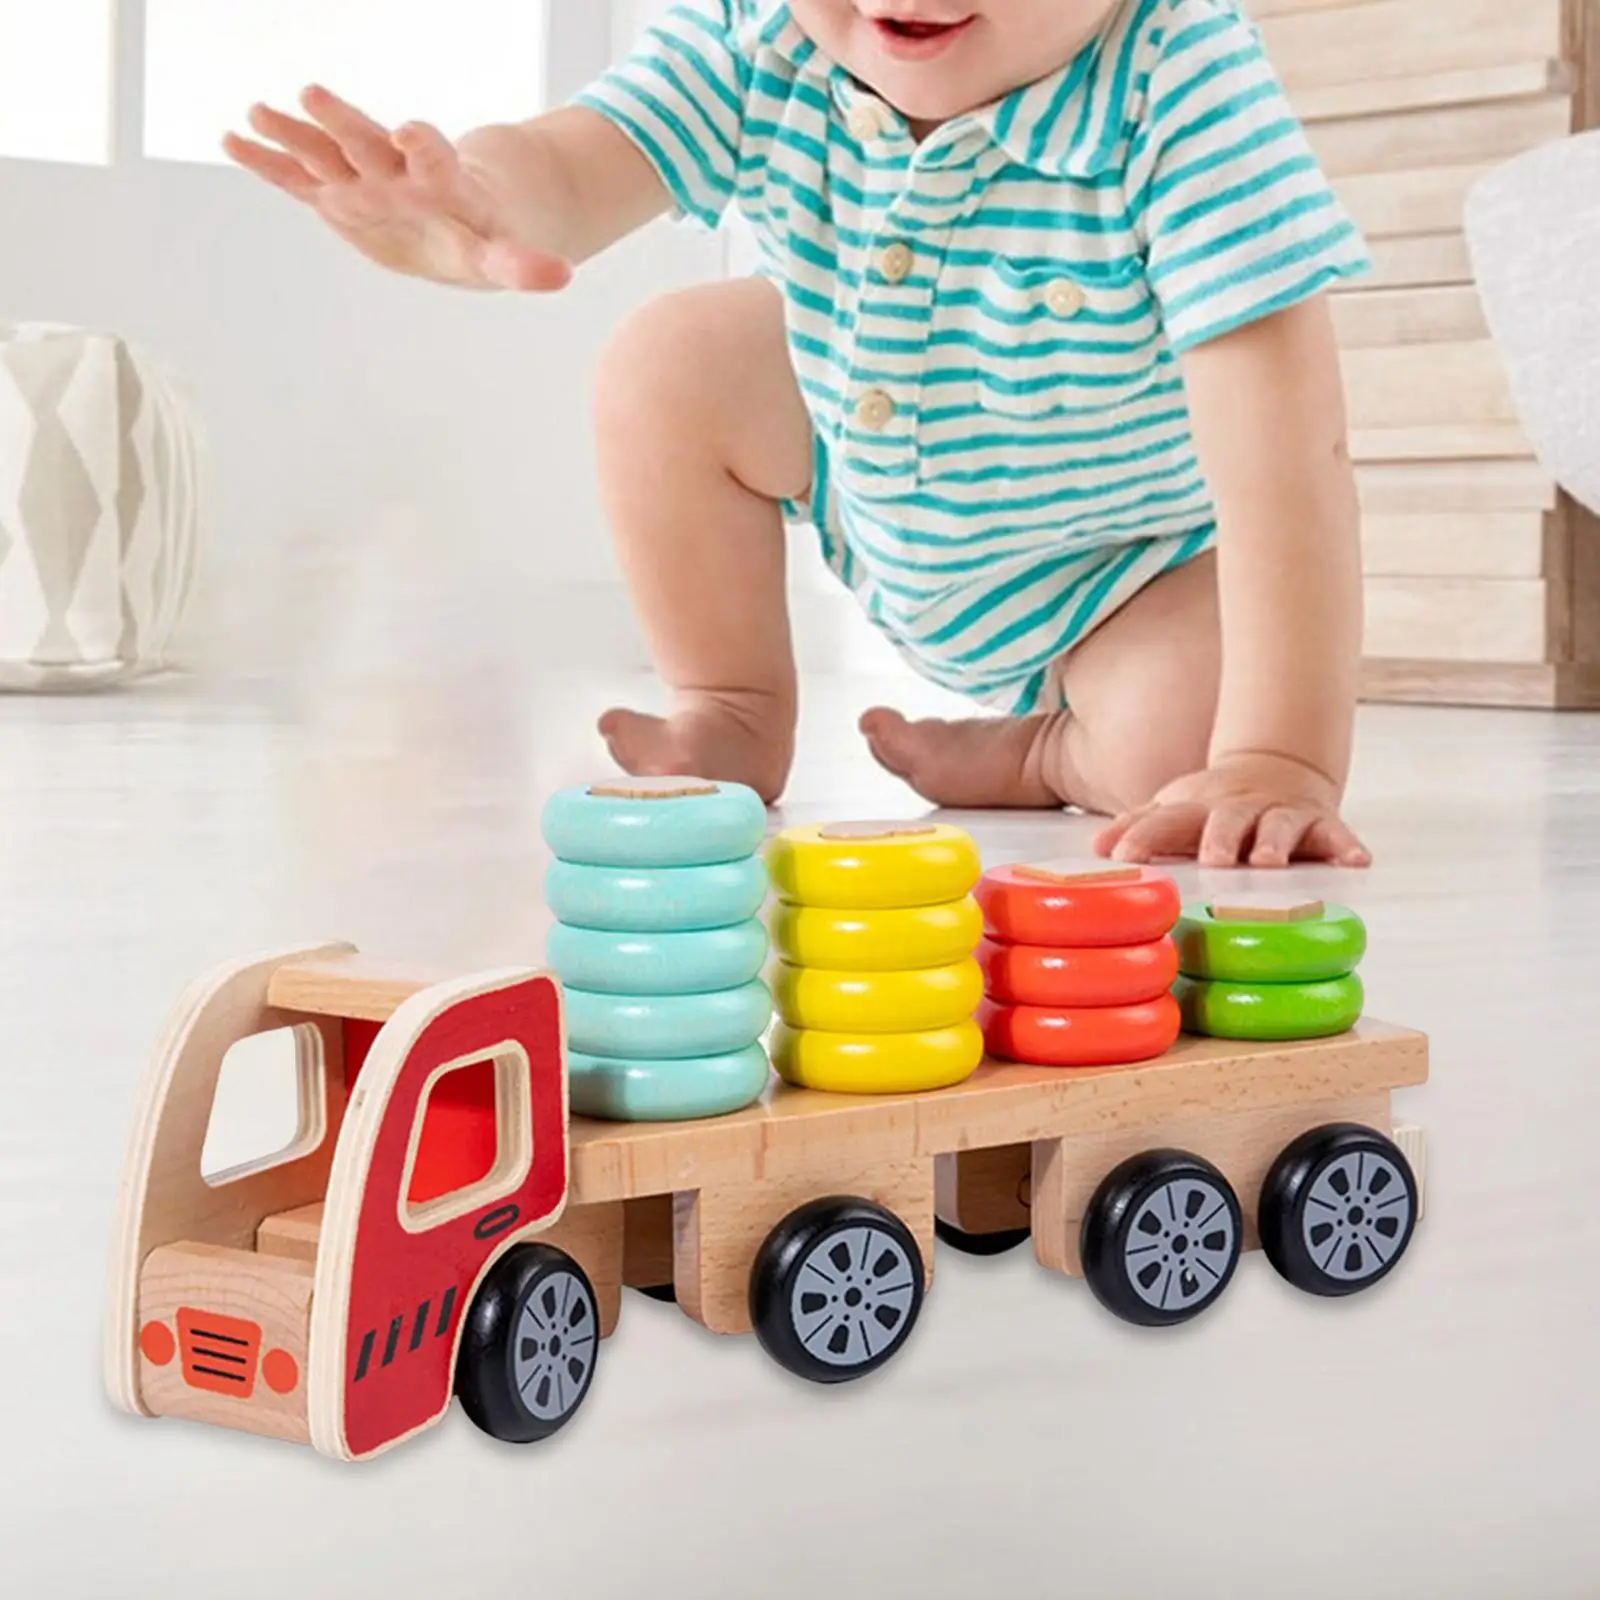 Wooden Sorting & Stacking Toys Wooden Stacking Train Shape Sorting Building Toys Pull Along Puzzle Kids for Toddlers Ages 2+